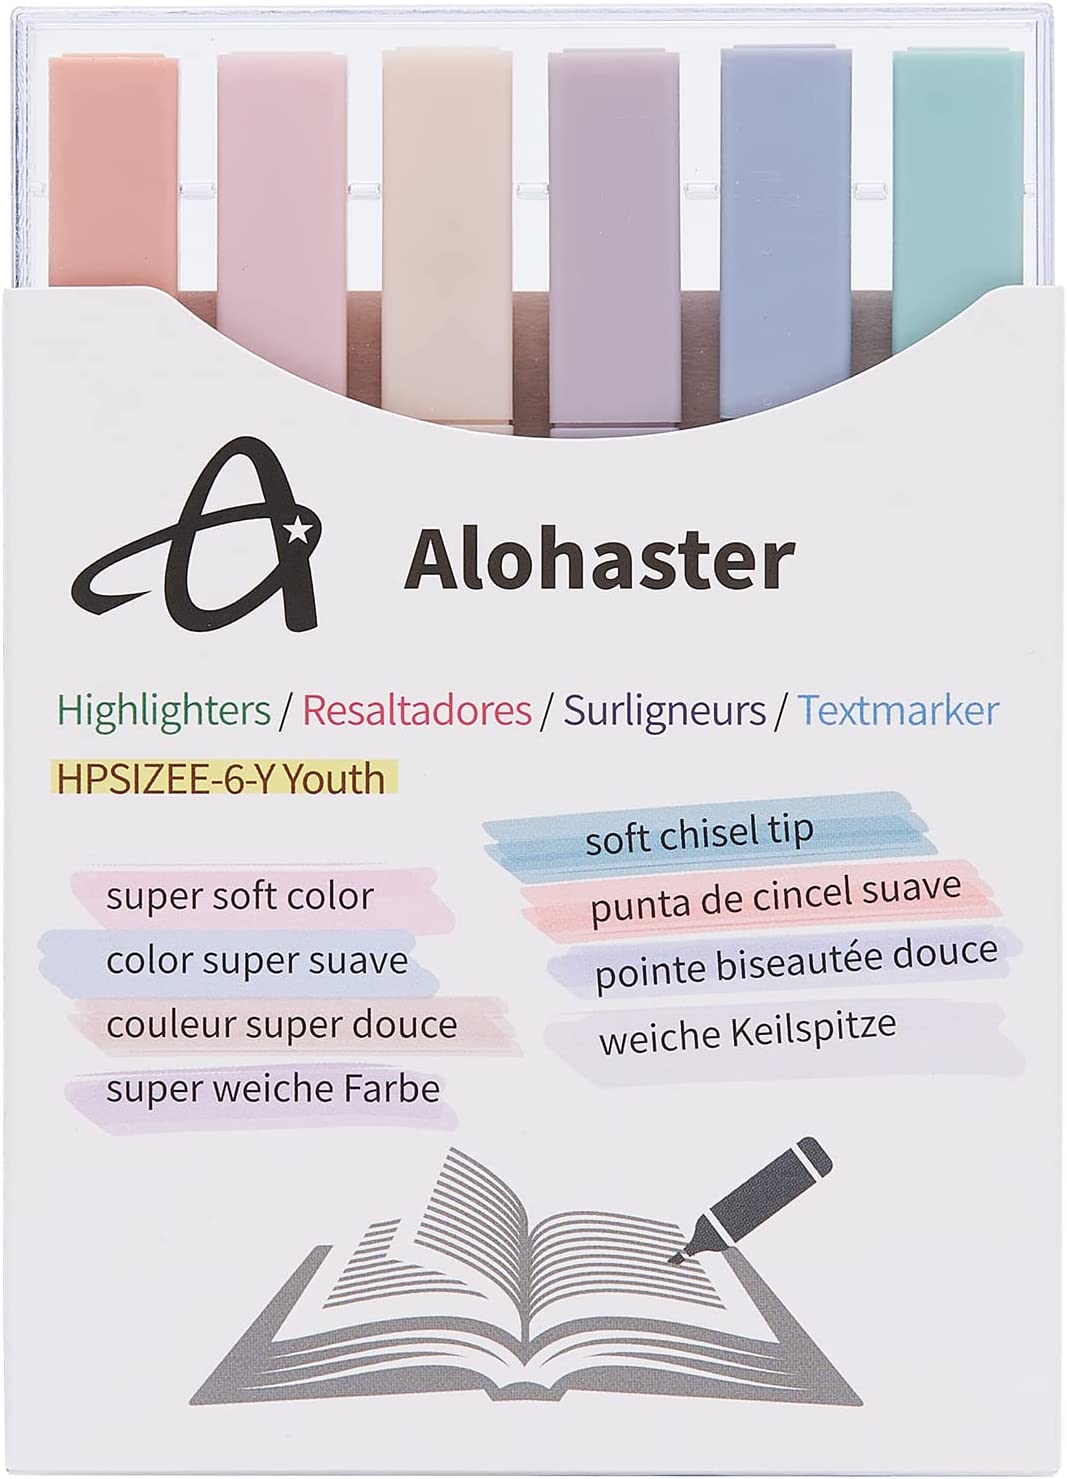 lohaster HPSIZEE Aesthetic Cute Bible Highlighters Mild Assorted Colors With Soft Chisel Tip back